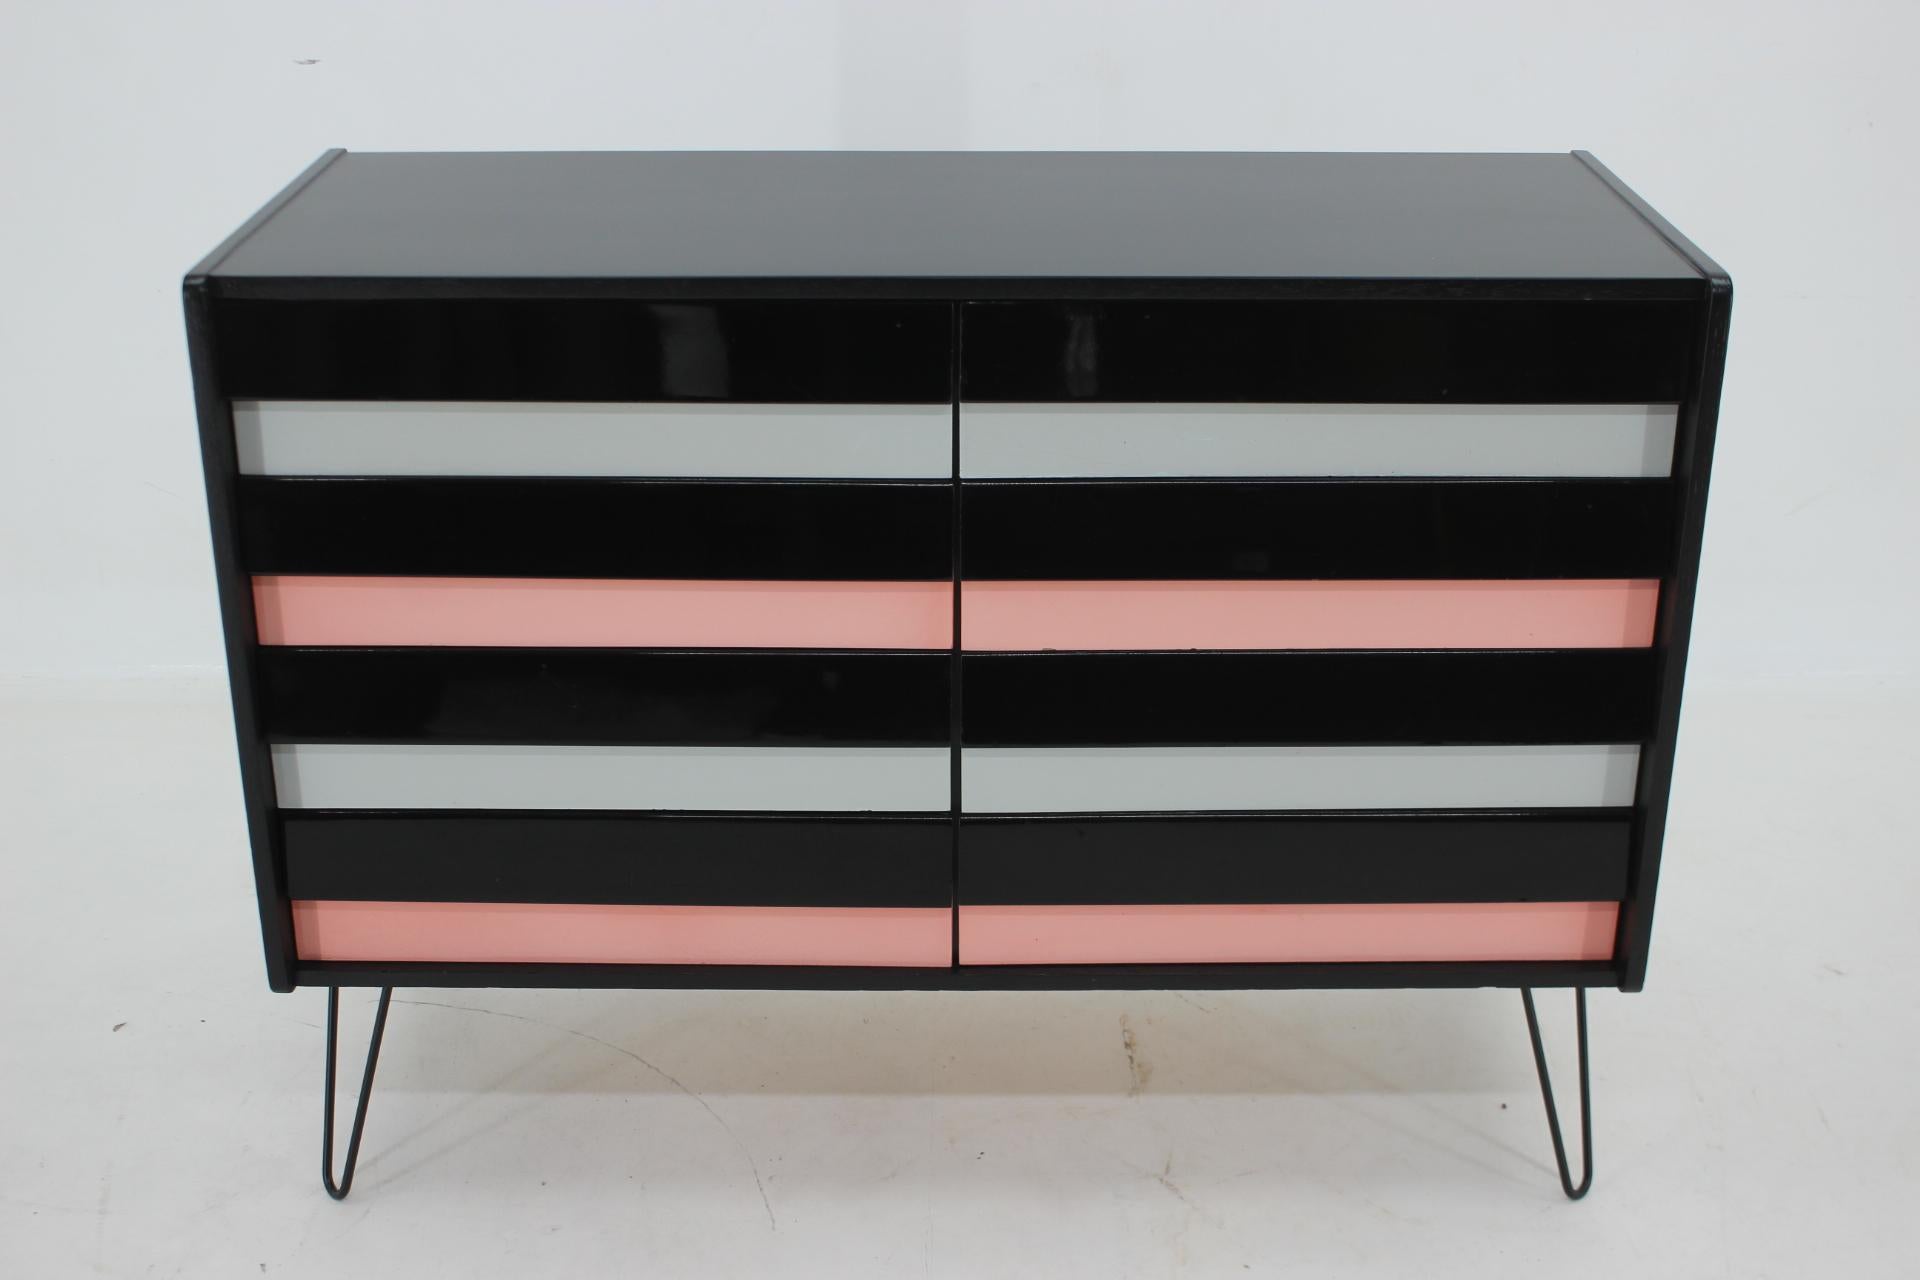 - newly lacquered body in black mat finish 
- Drawers in original condition with minors signs of use (has been repolished only )
- The iron hairpin legs were added afterwards.